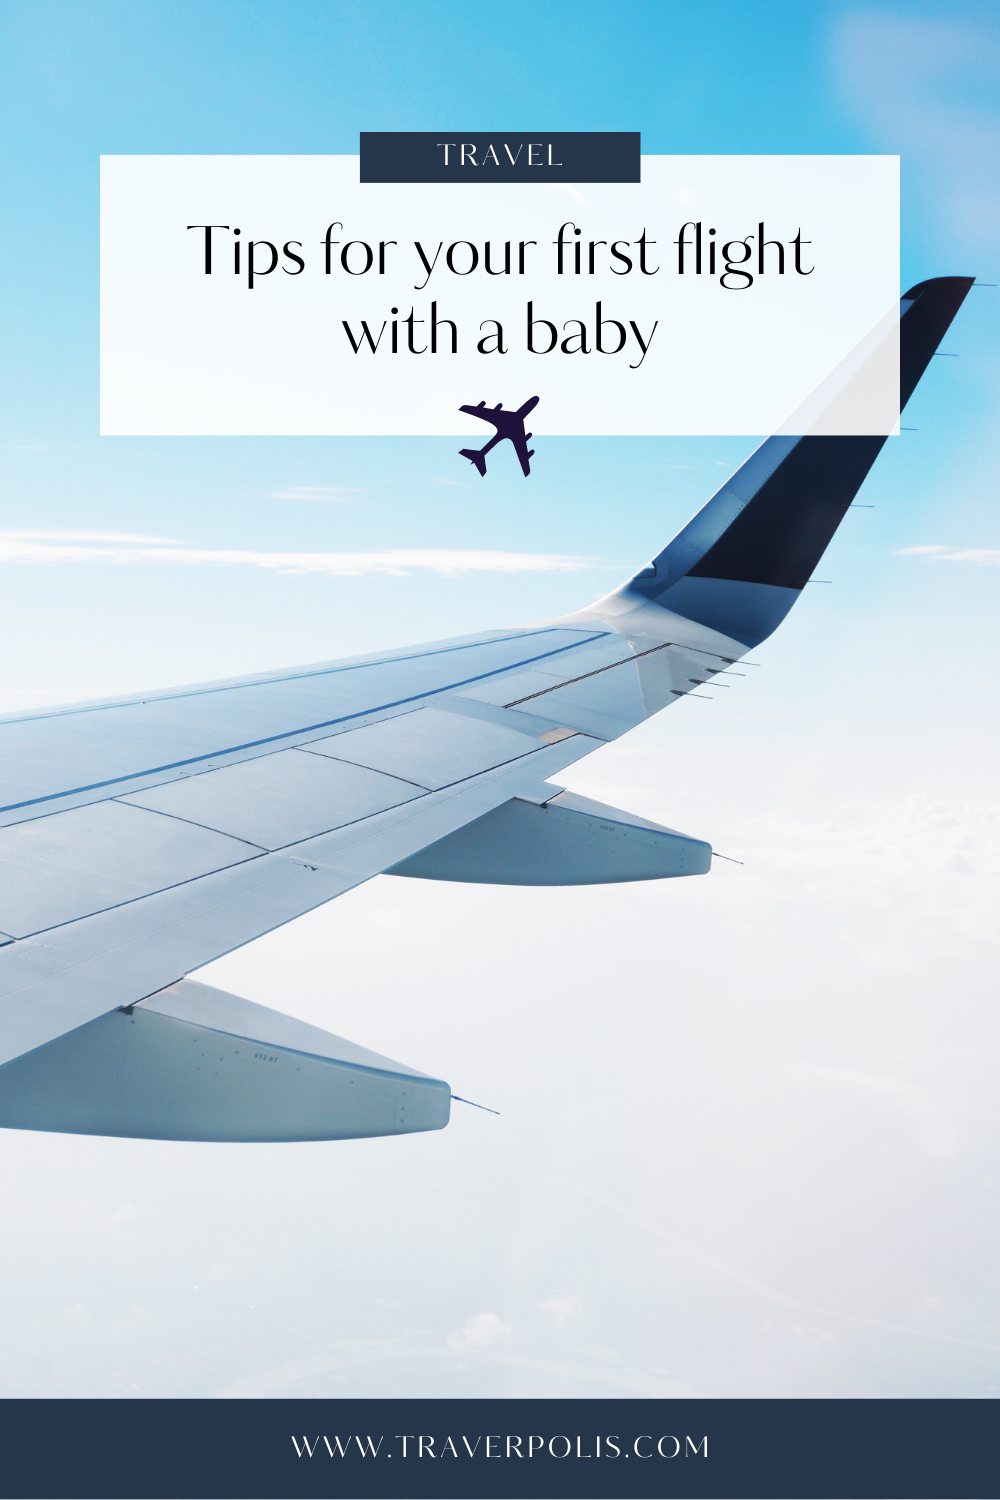 Tips for your first flight with a baby